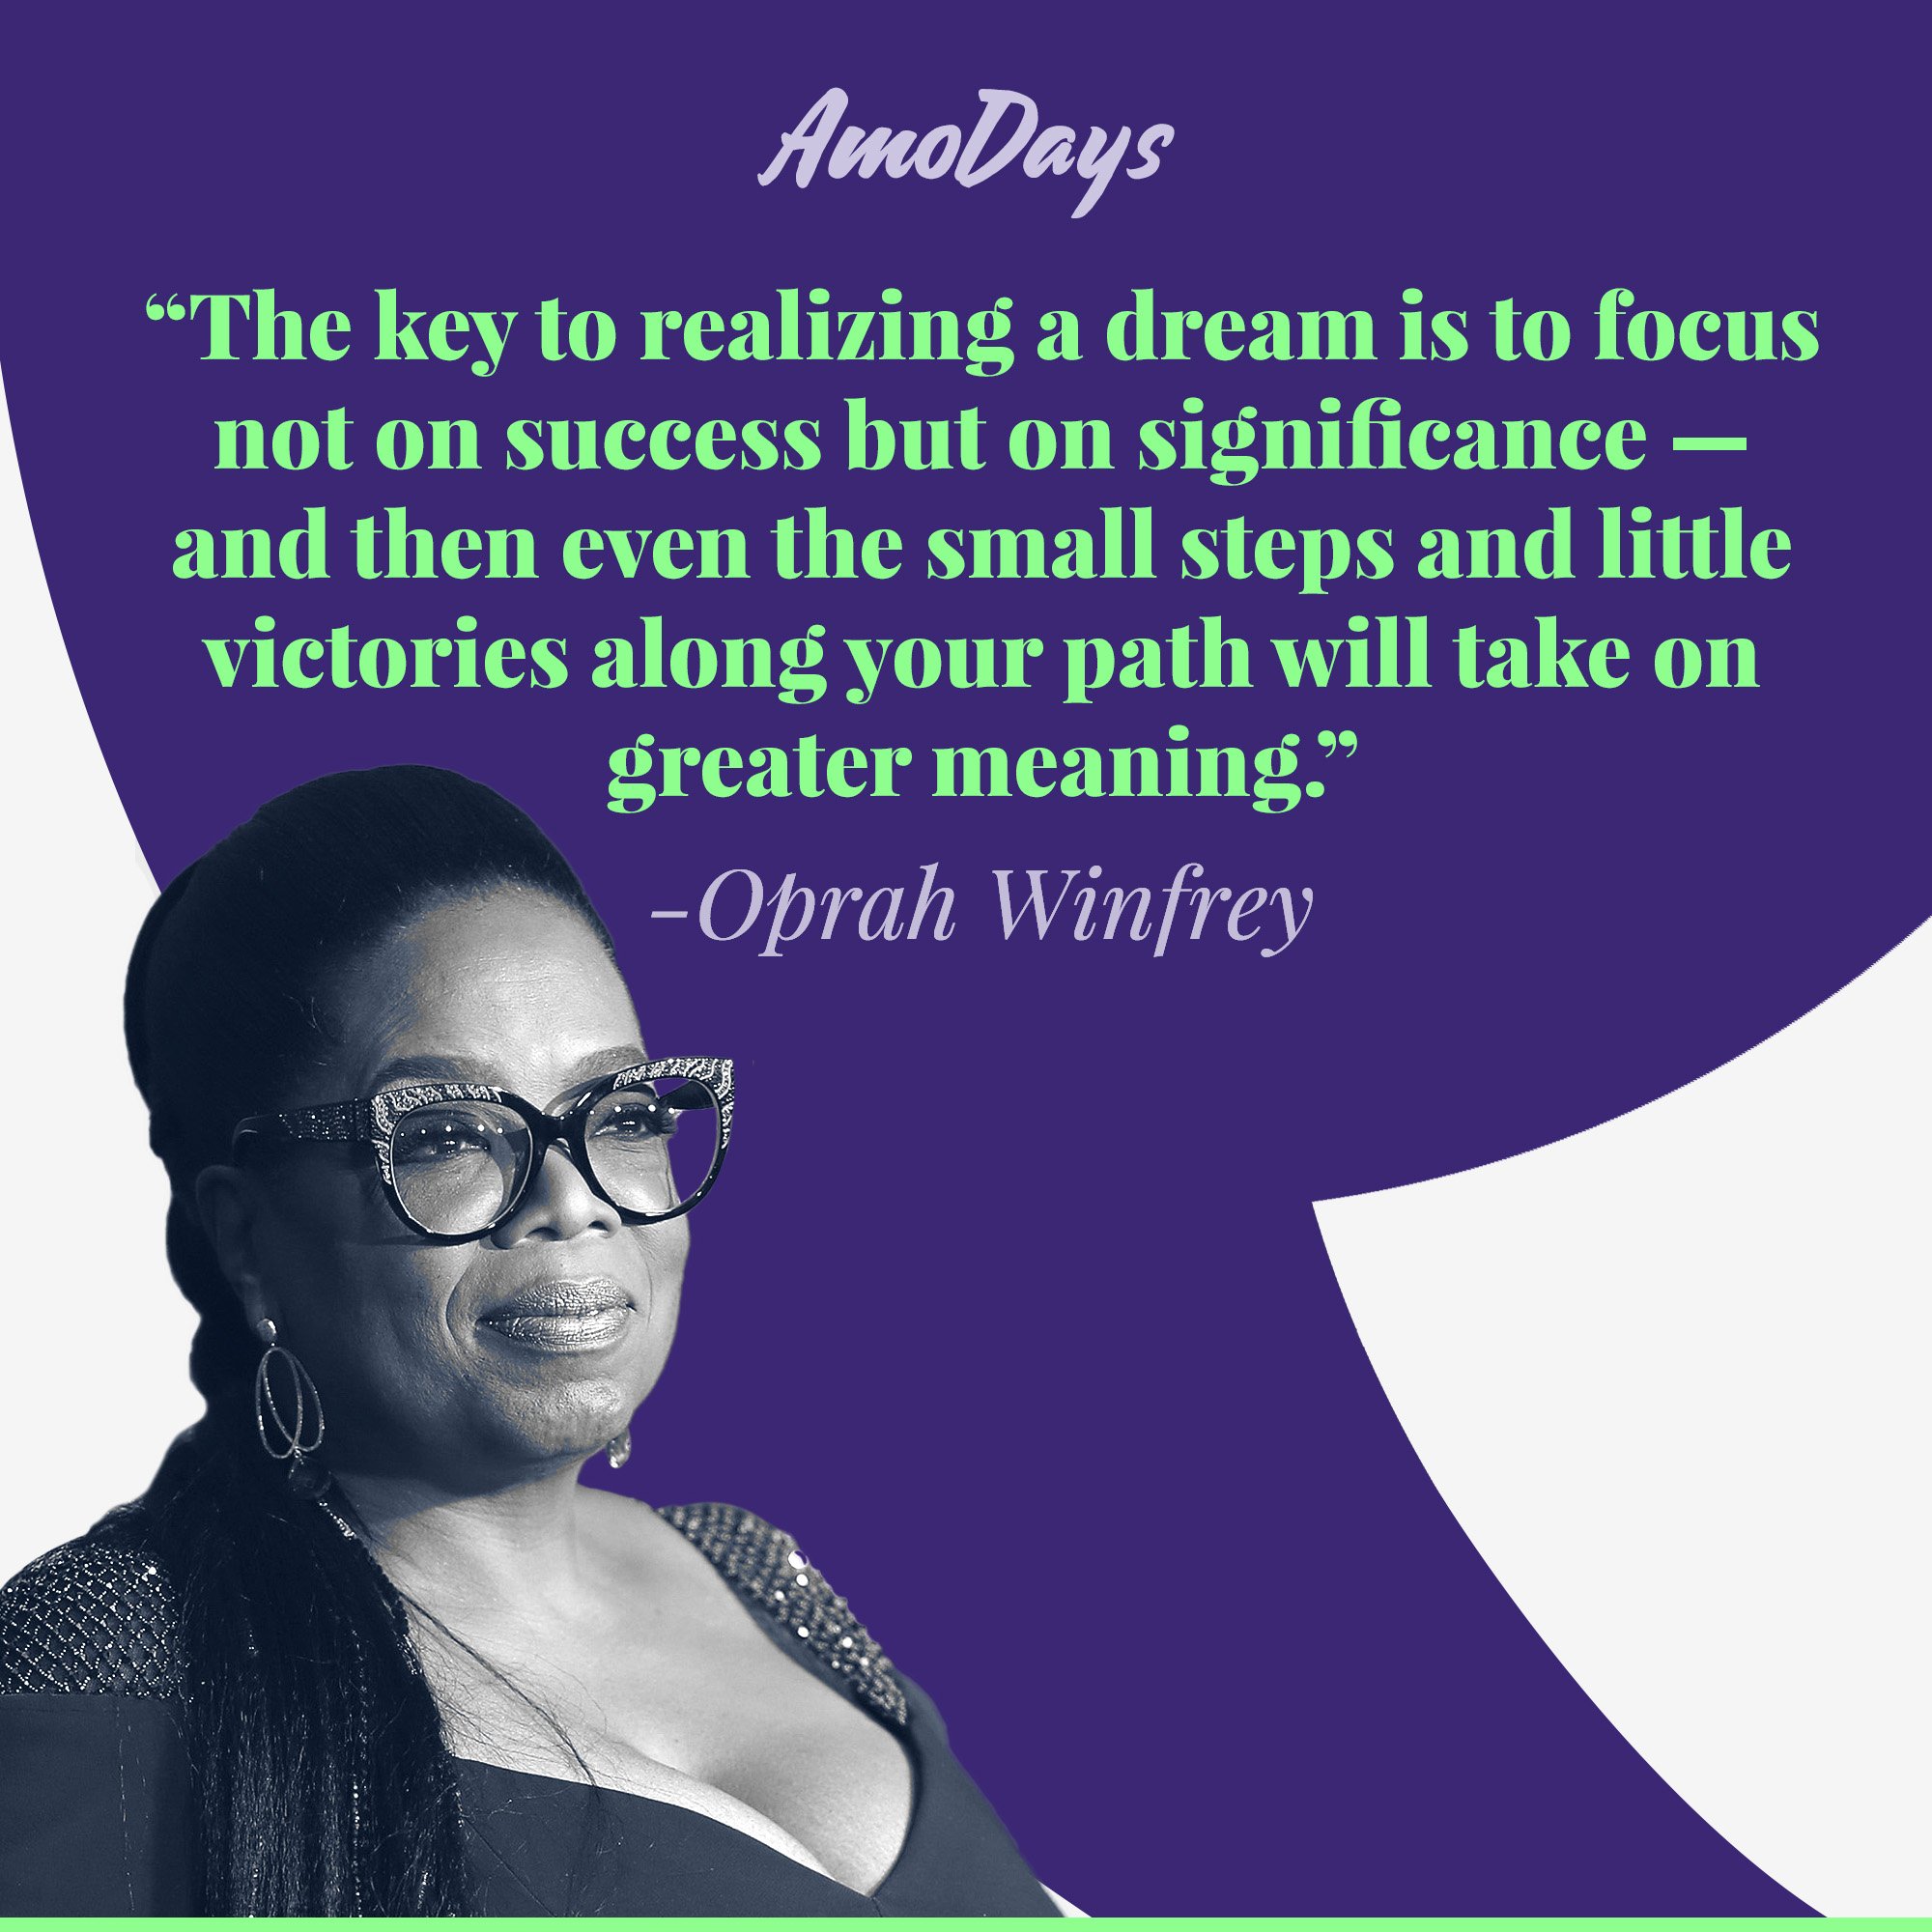 Oprah Winfrey's quote: "The key to realizing a dream is to focus not on success but on significance - and then even the small steps and little victories along your path will take on greater meaning." | Image: AmoDays